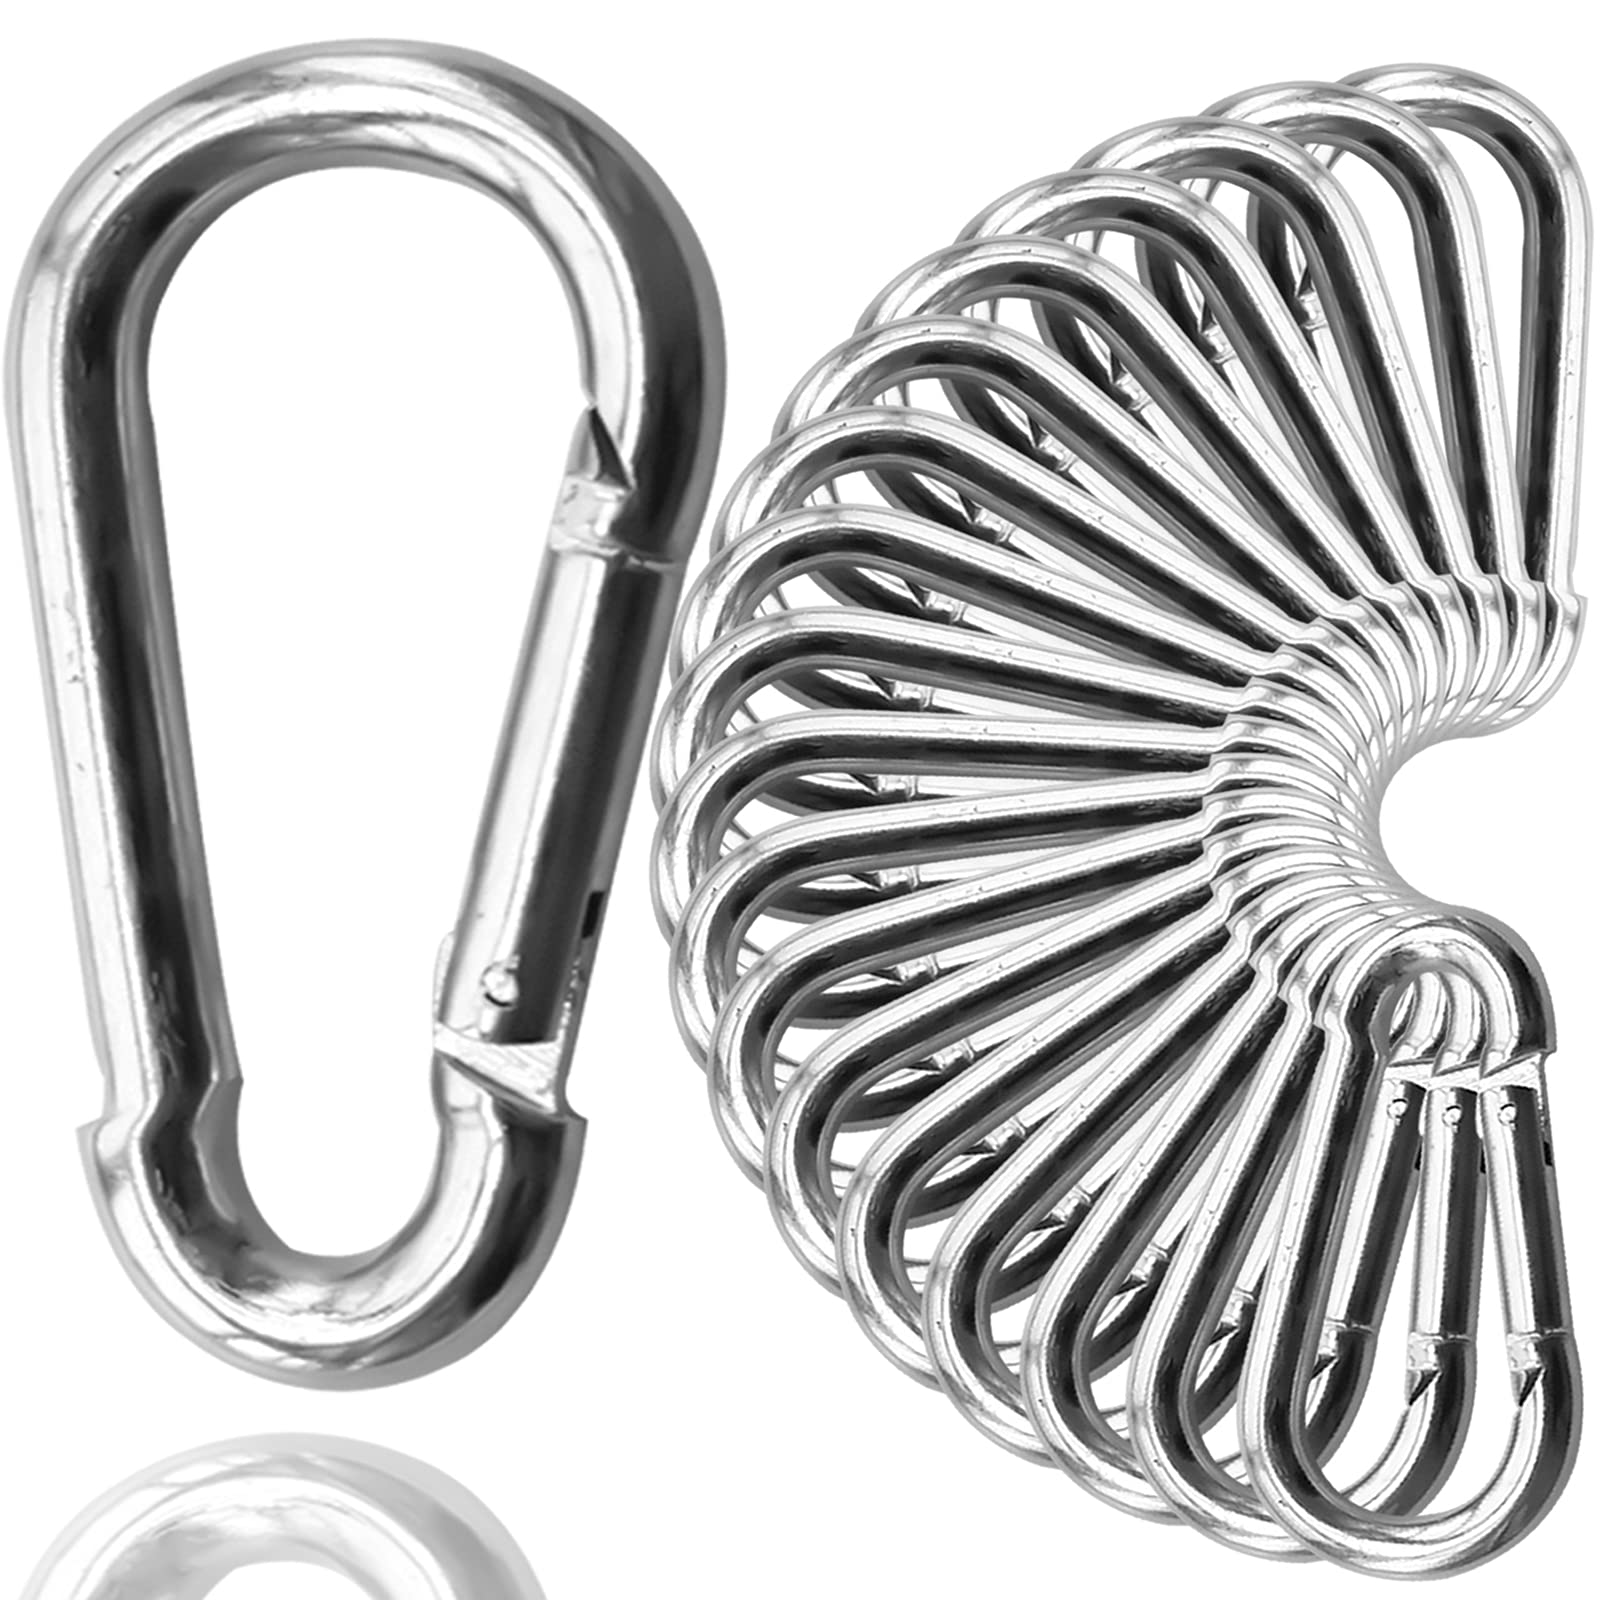 30Pack Heavy Duty Spring Snap Hooks 4Inch, 3/8 Carabiner Clips for Swing,  Large Steel Chain